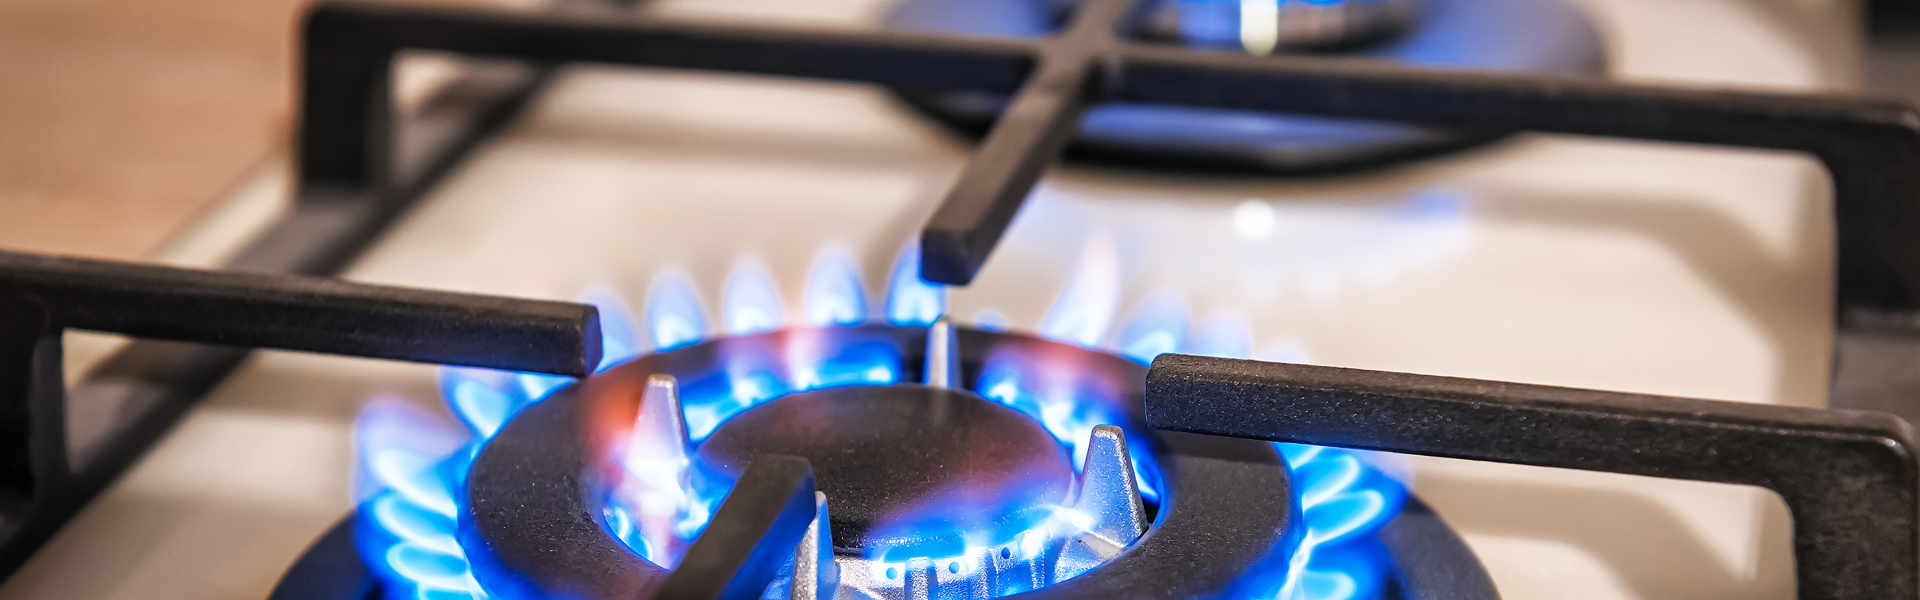 Gas hob with two rings, both have a blue flame. 